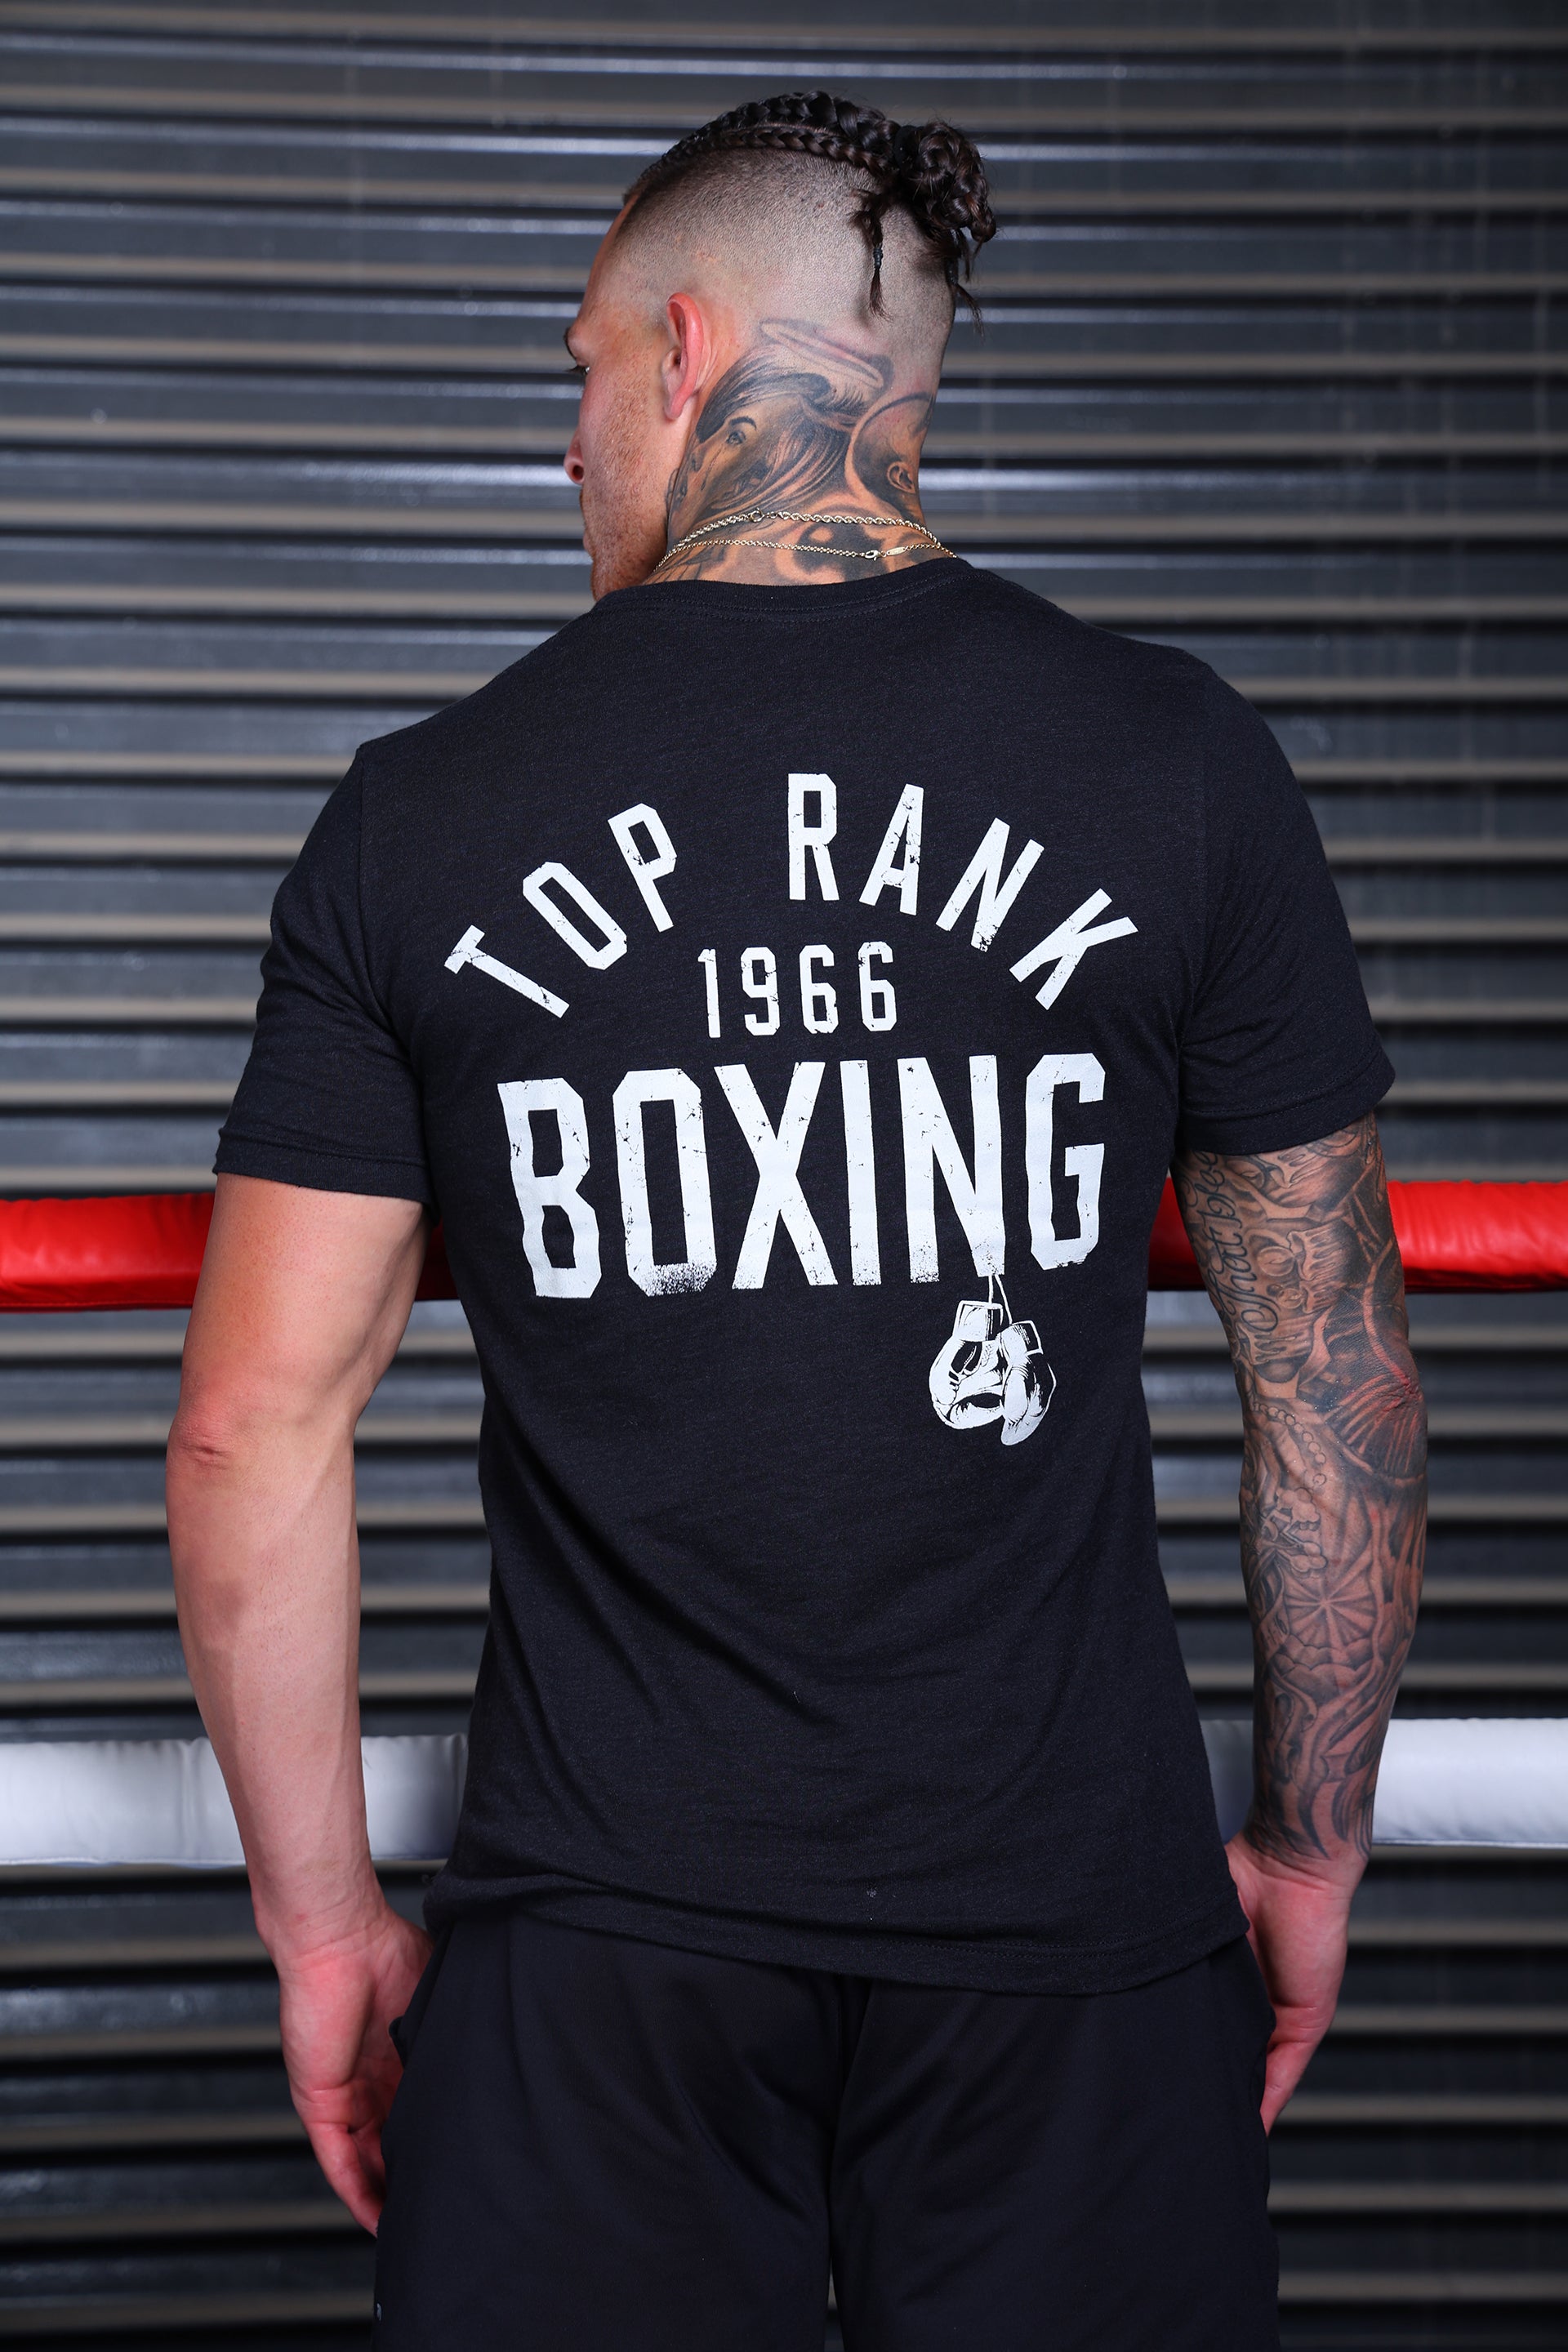 Back view of a man wearing a black t-shirt with "Top Rank 1966 Boxing" printed in white, standing in front of a boxing ring.